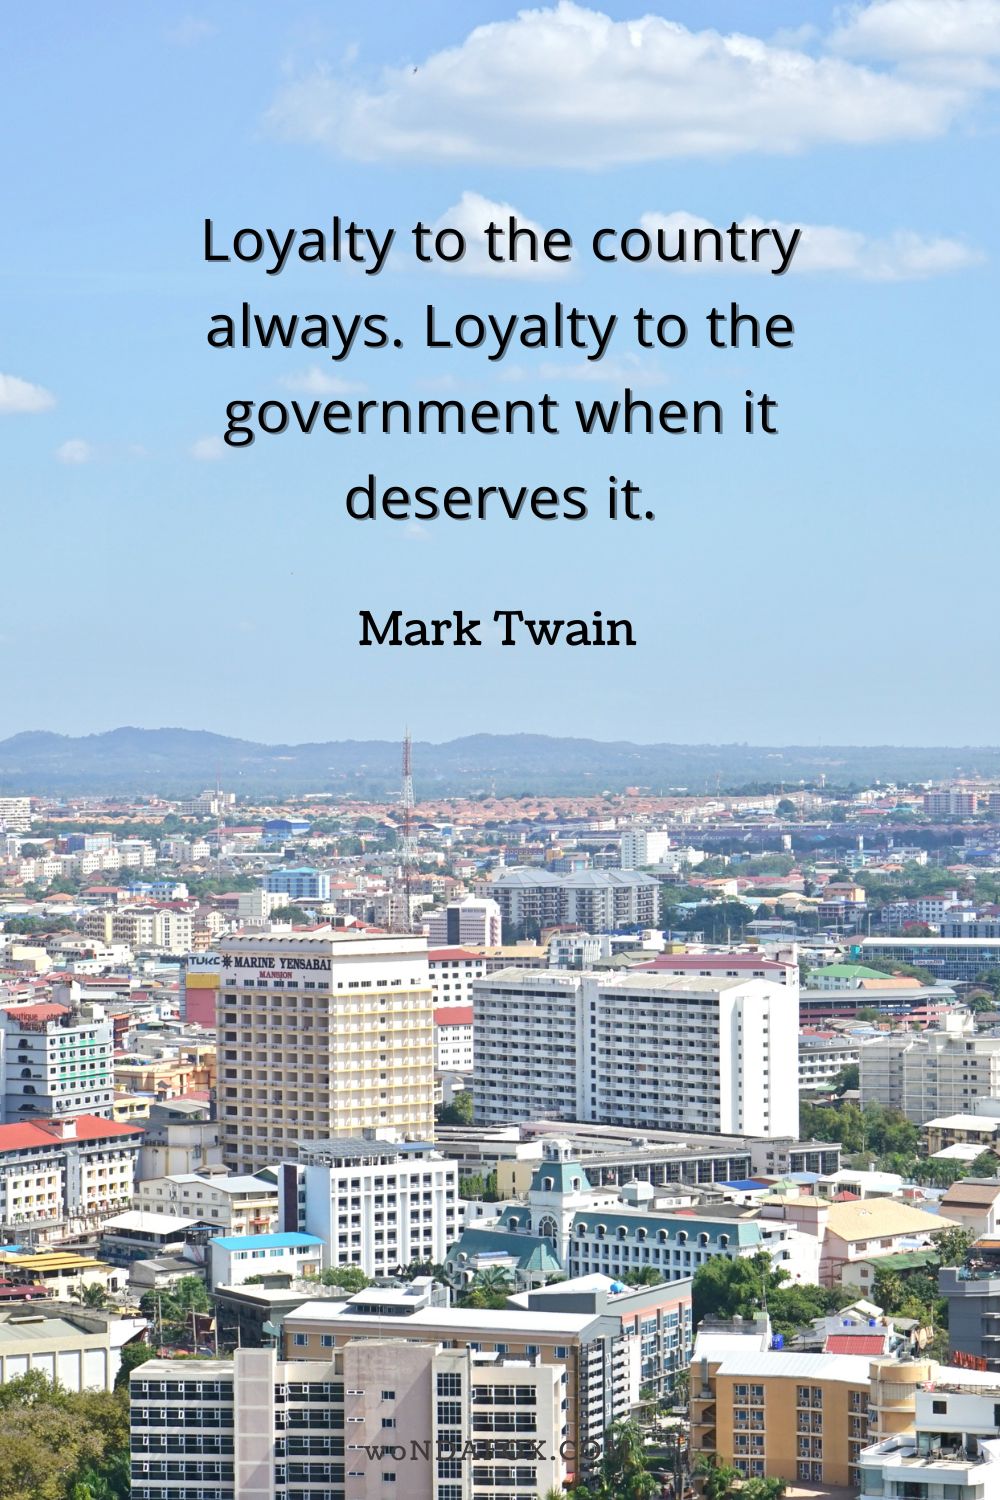 “Loyalty to the country always. Loyalty to the government when it deserves it.”